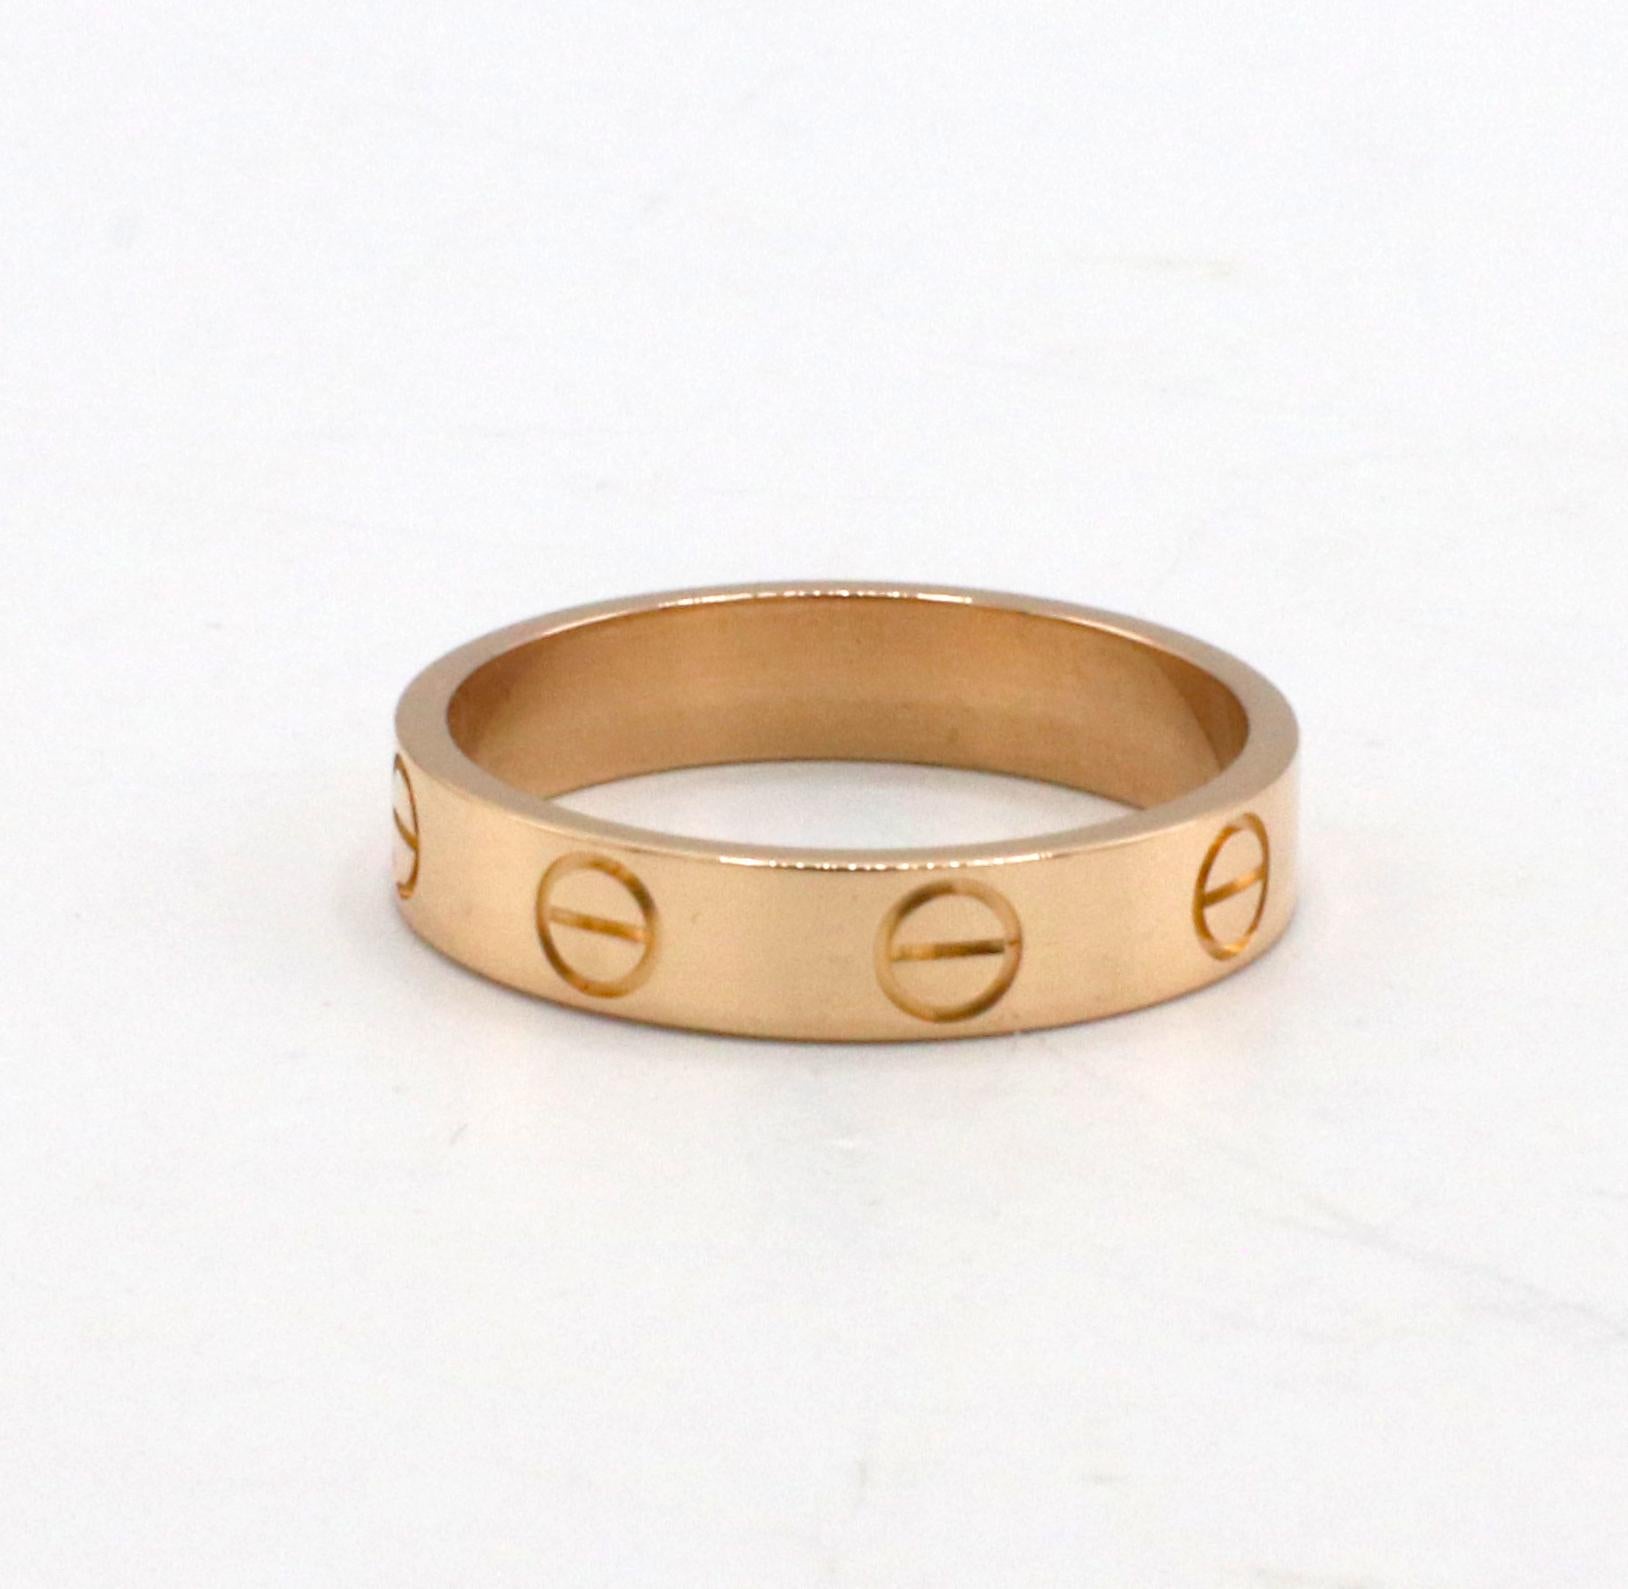 Cartier Love Rose Gold Wedding Band Ring 
Metal: 18k rose gold
Weight: 3.1 grams
Width: 3.6mm
Size: 49 (4.75 US)
Box & Papers
Retail: $1,170 USD

